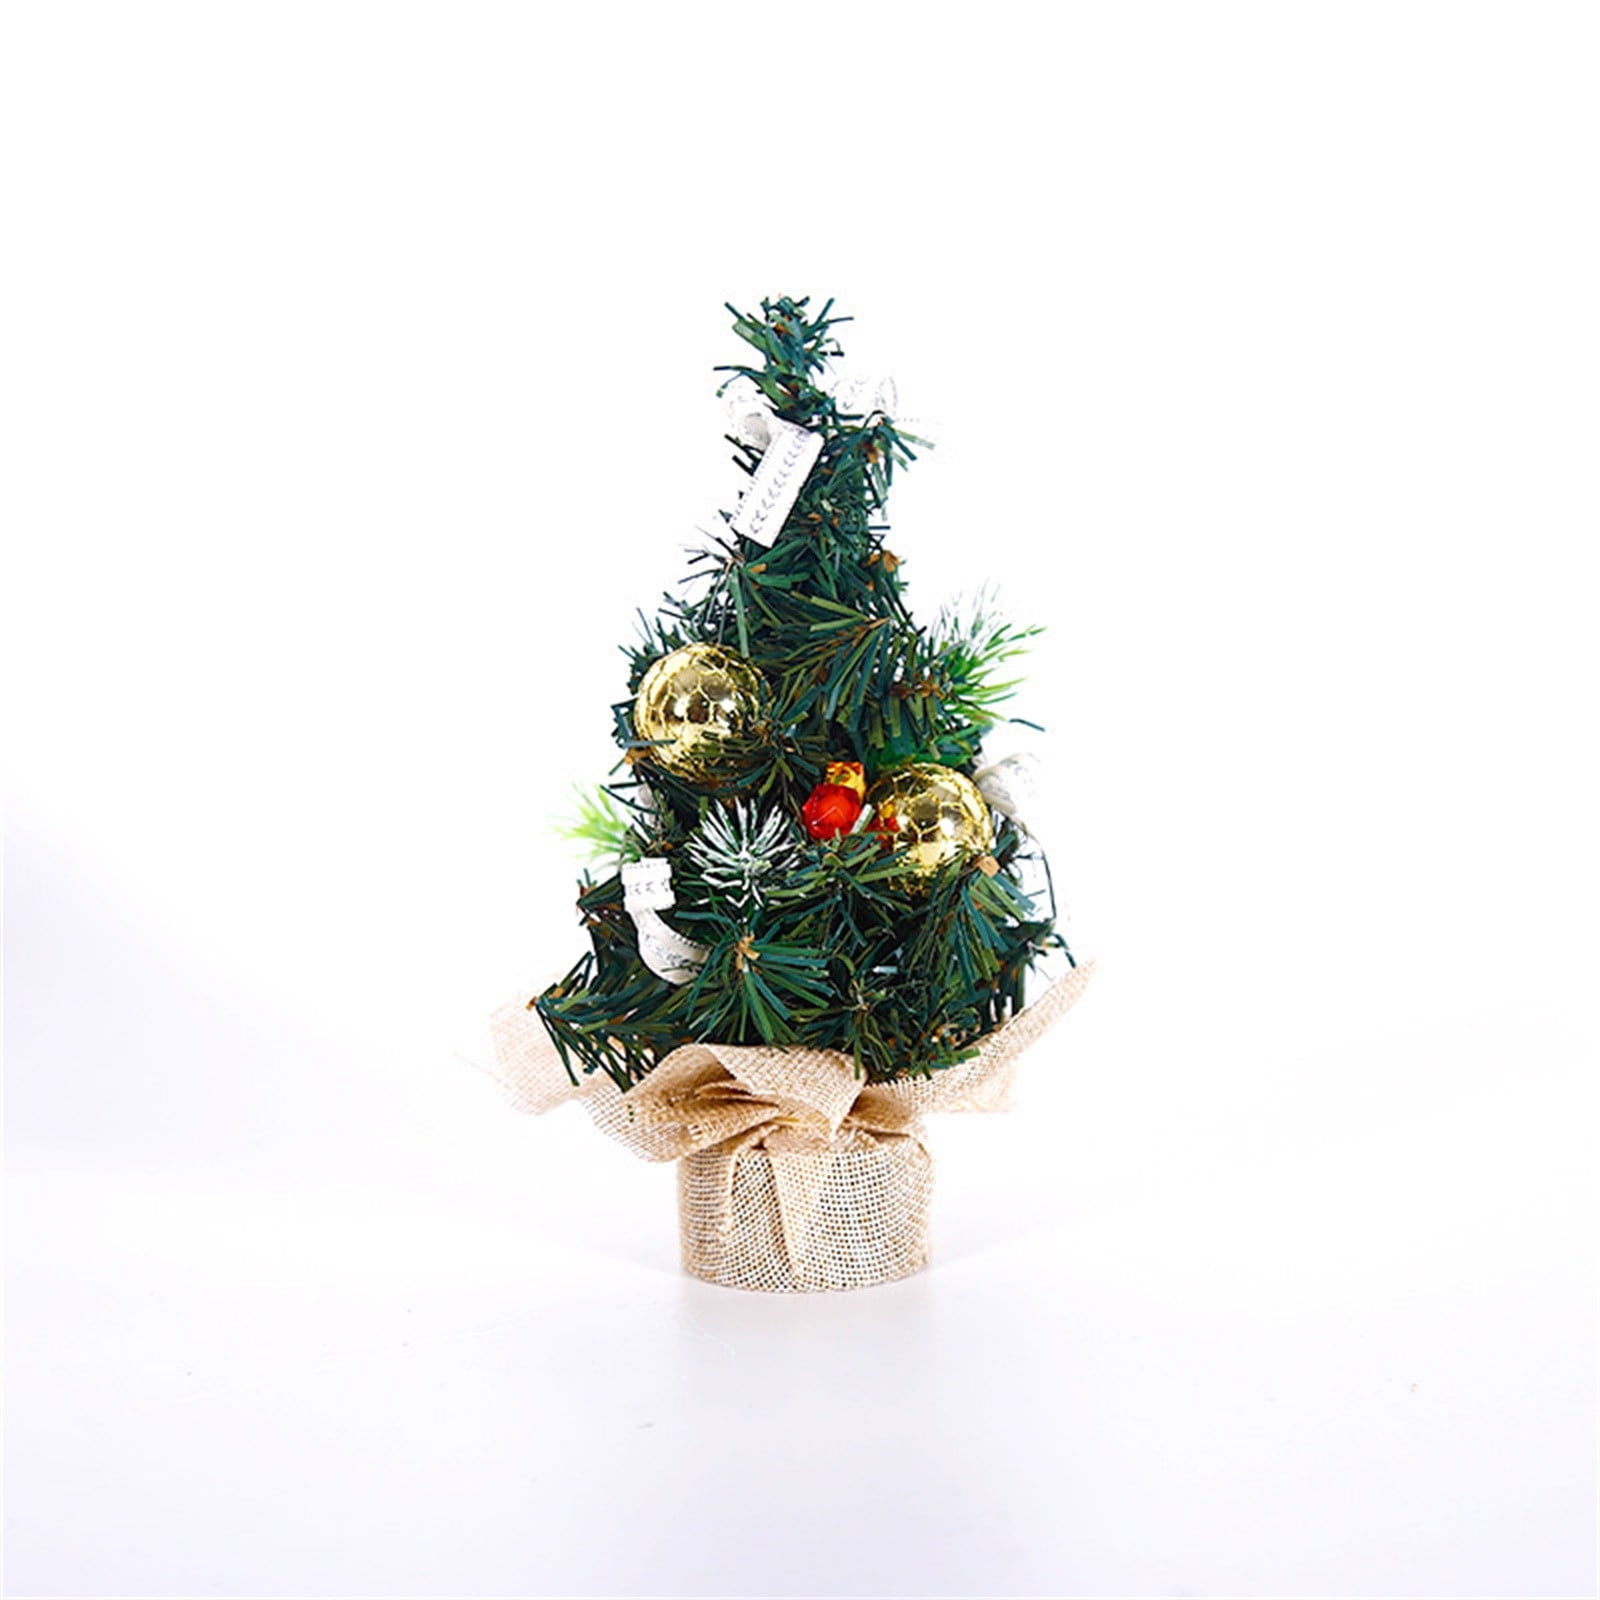 Children Toy Bedroom Office Home Decorations Merry Christmas Tree Decorative 